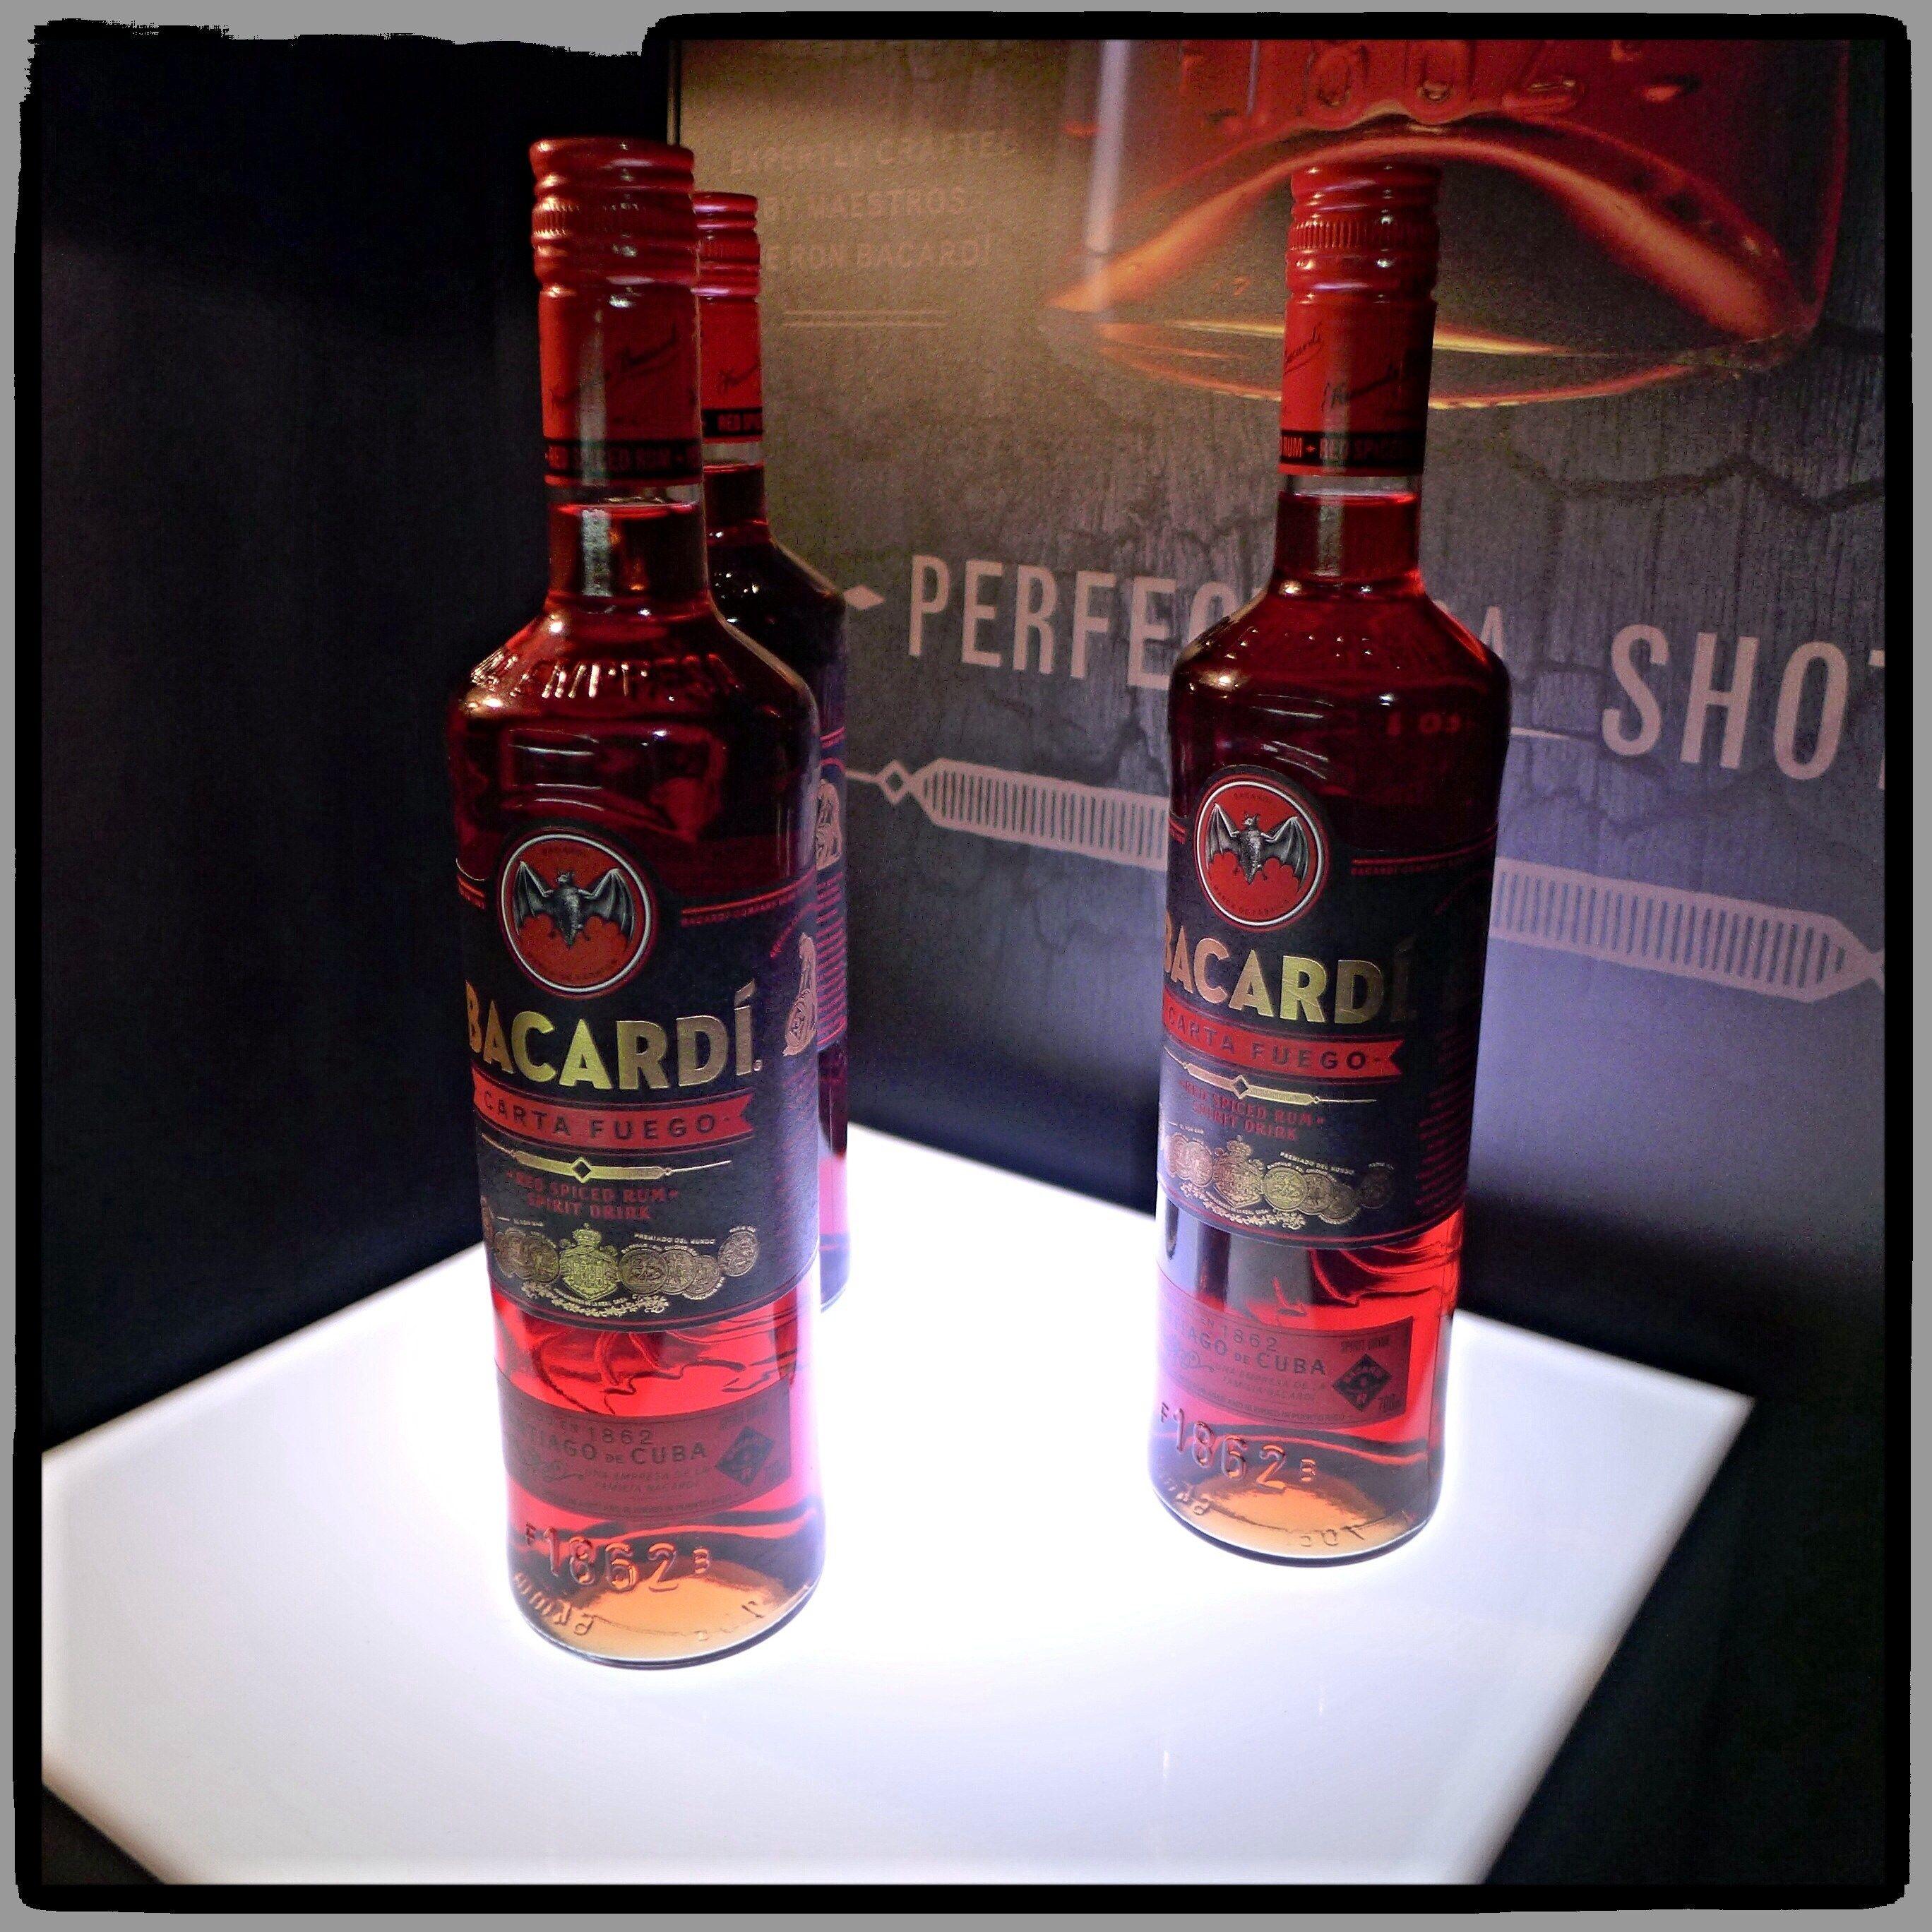 New Bacardi Bottle Logo - New Bottle and label design for Bacardi | Foodie Explorers